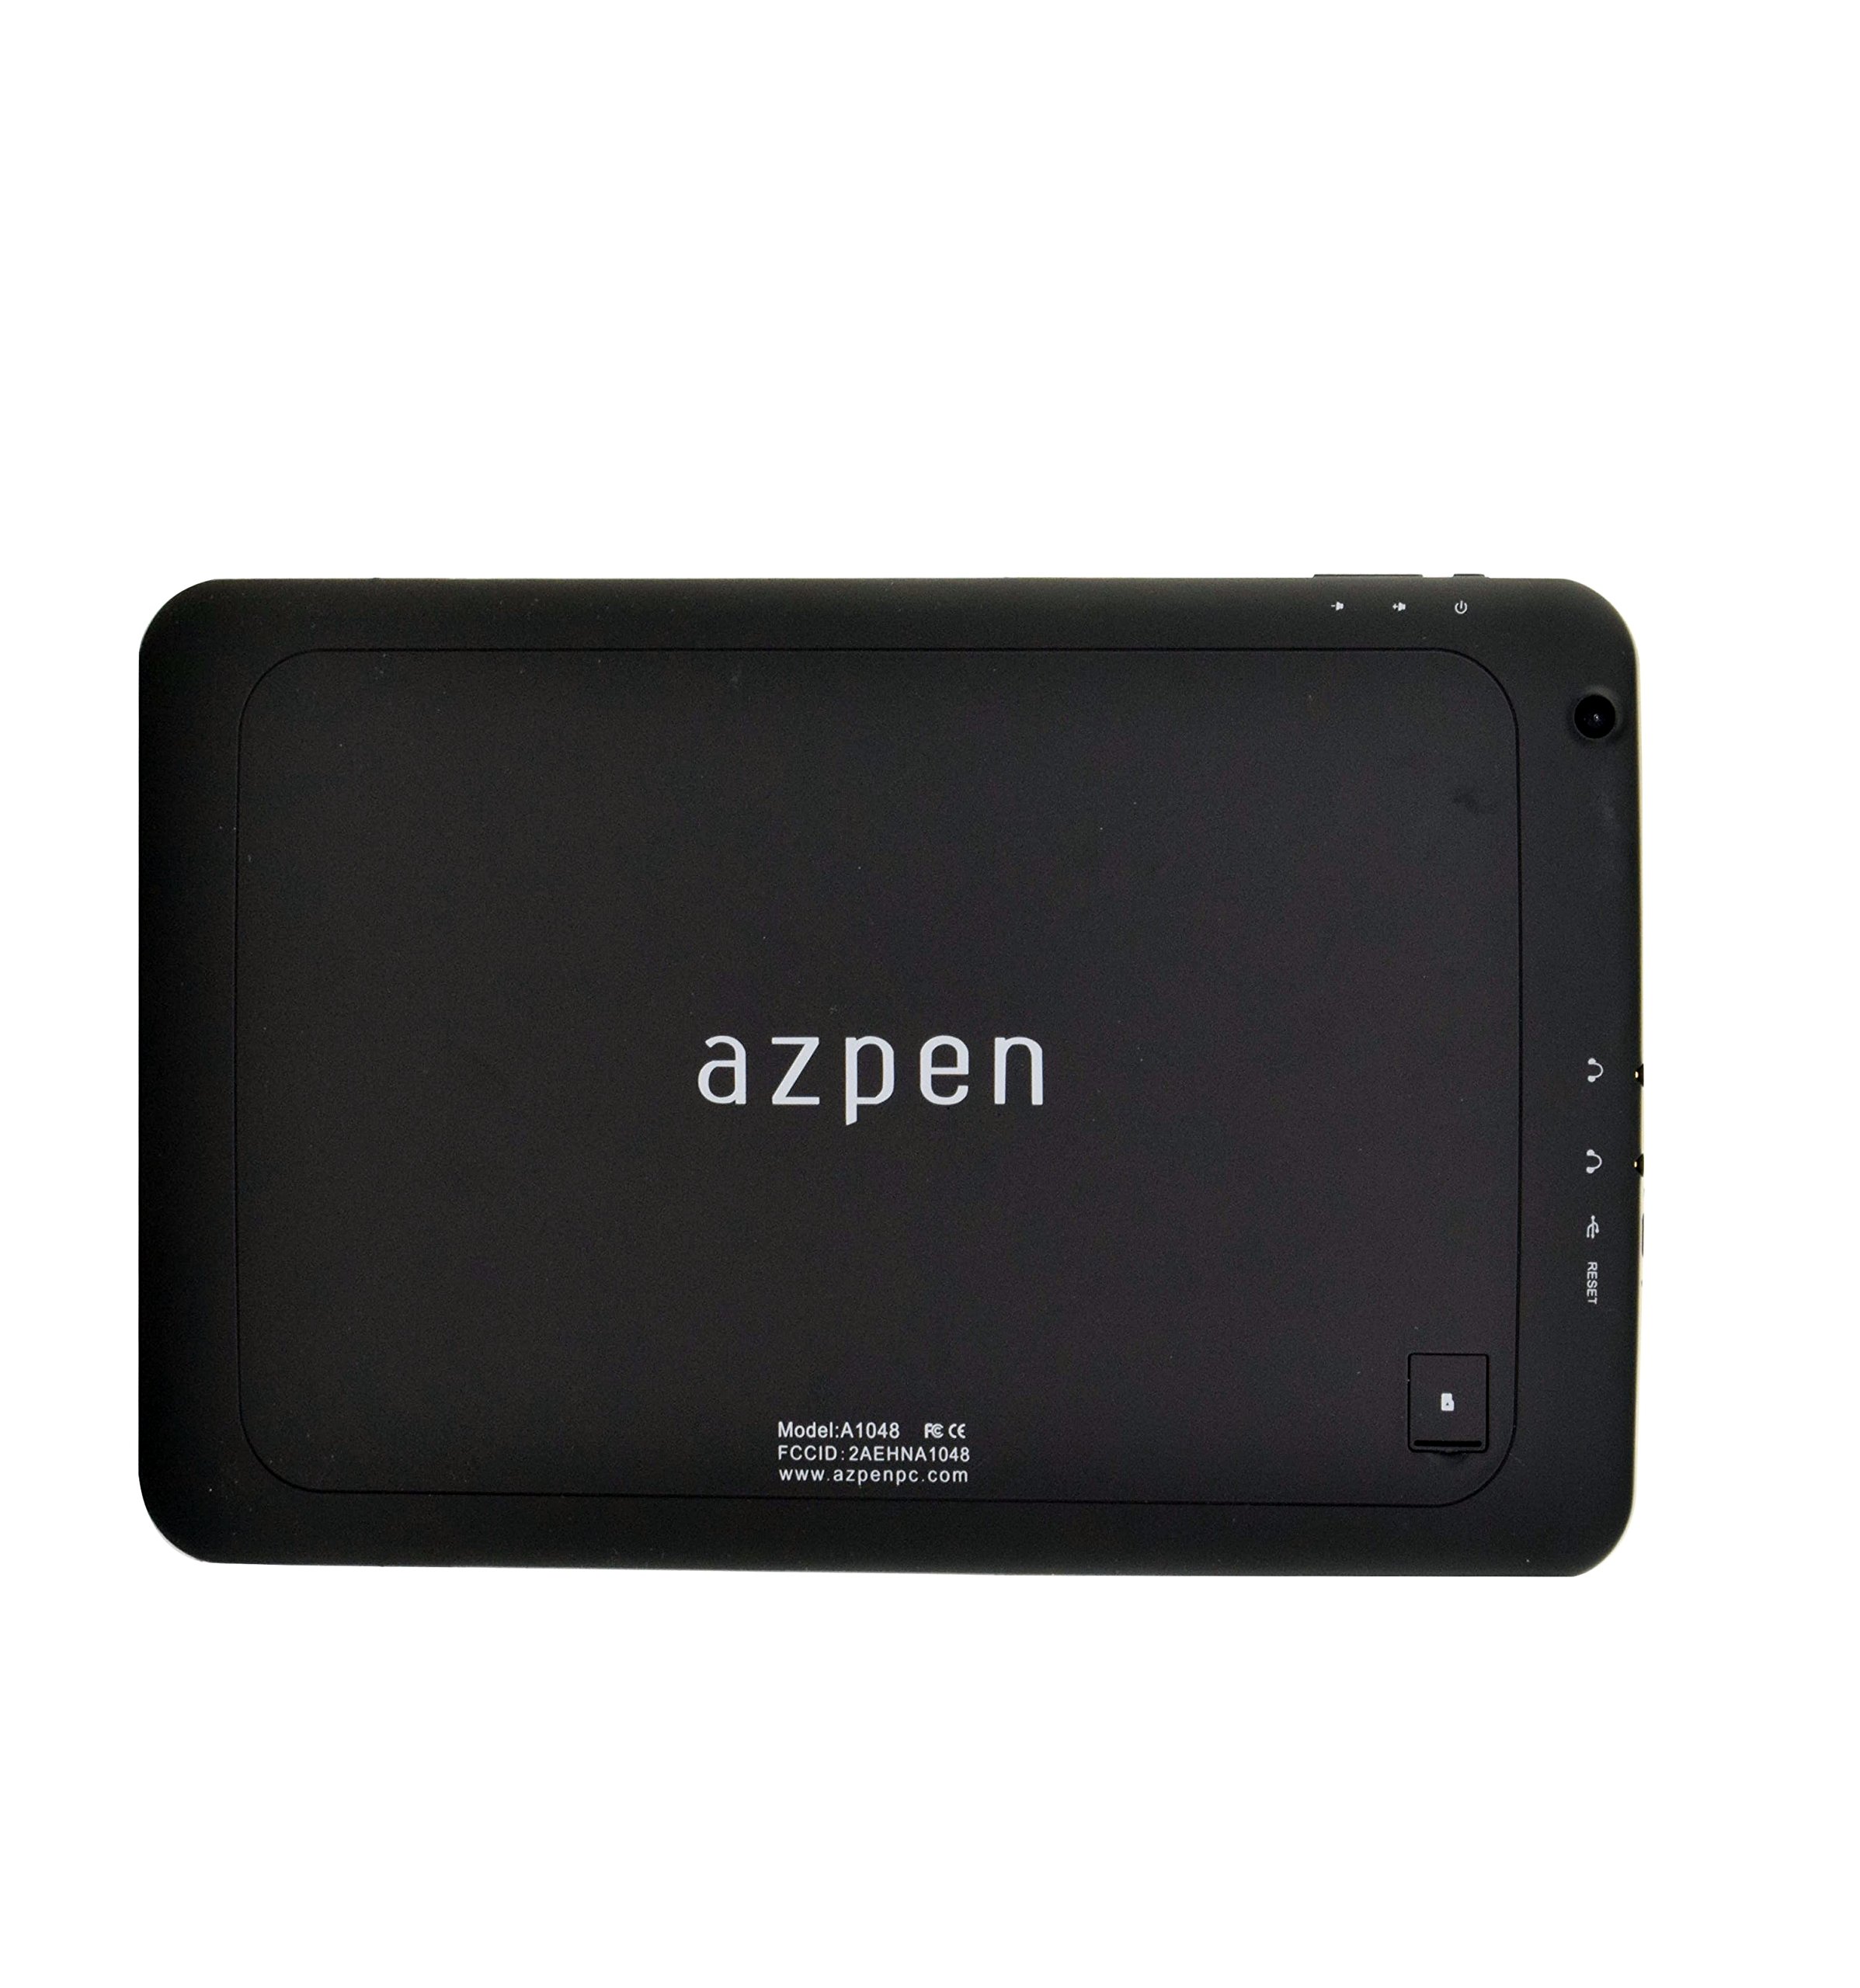 Azpen A1048 10.6 Inch 1366 x 768 HD IPS LCD Quad Core Android 5.1 OS Tablet with 1GB RAM & 8GB Storage Dual cameras Ebook Store Game Store (20 Free) OfficeSuite and Google Play